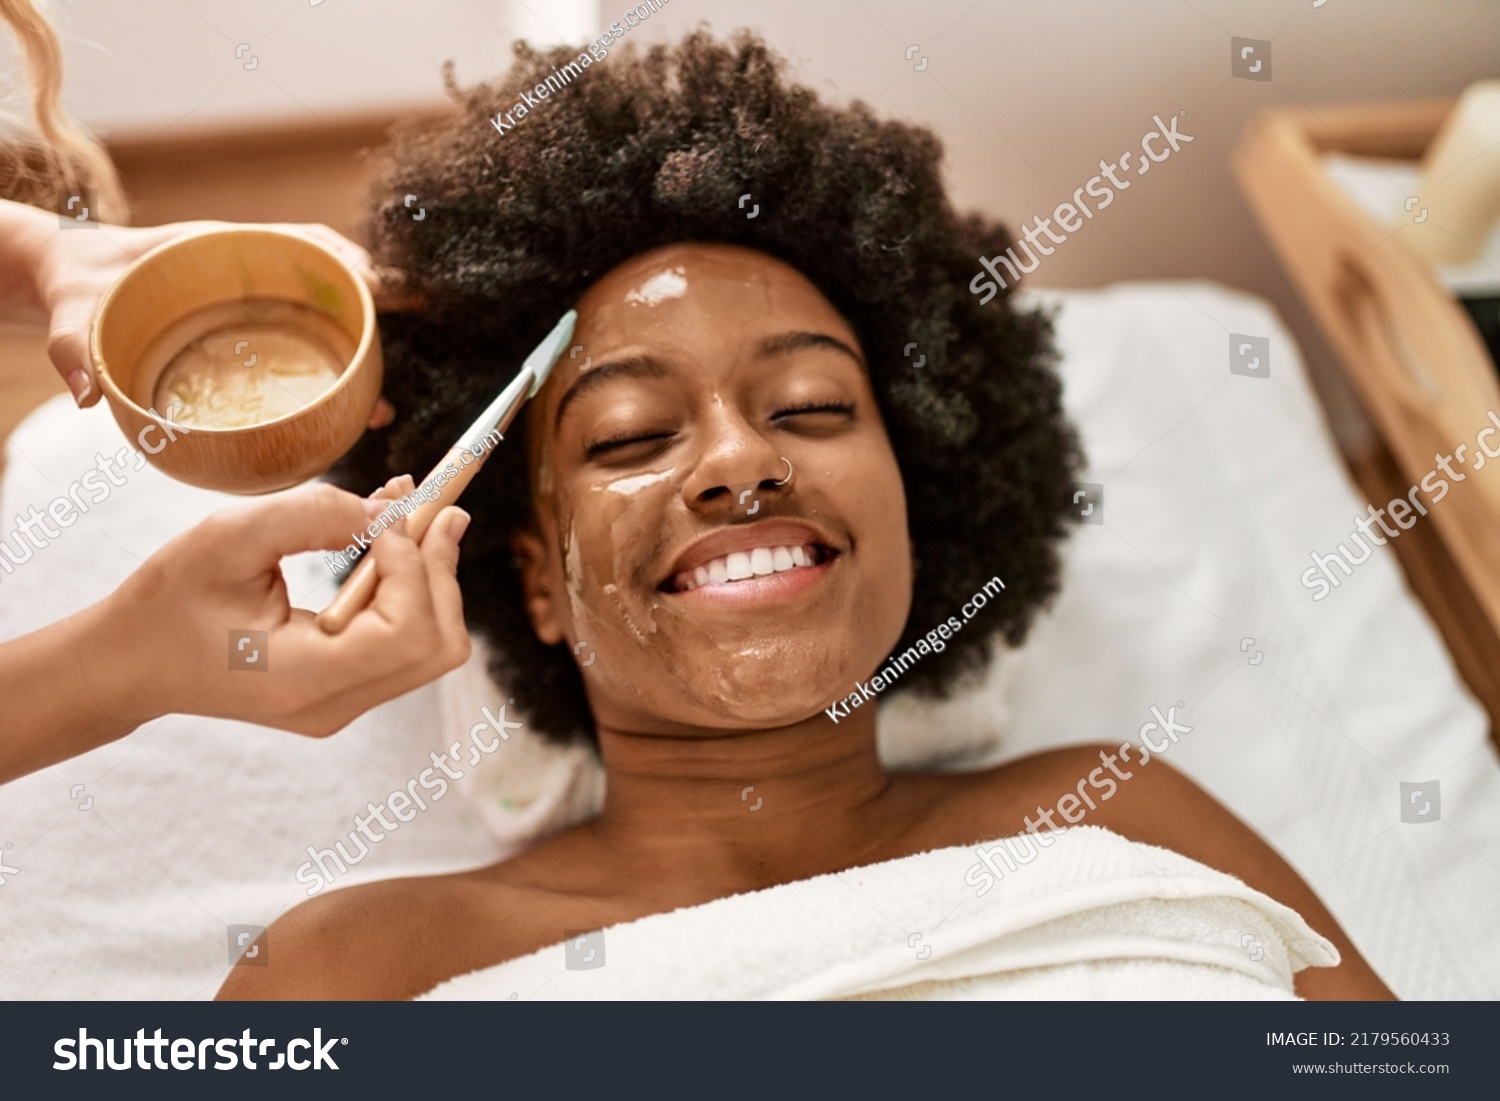 Young african american woman smiling confident having facial treatment at beauty center #2179560433